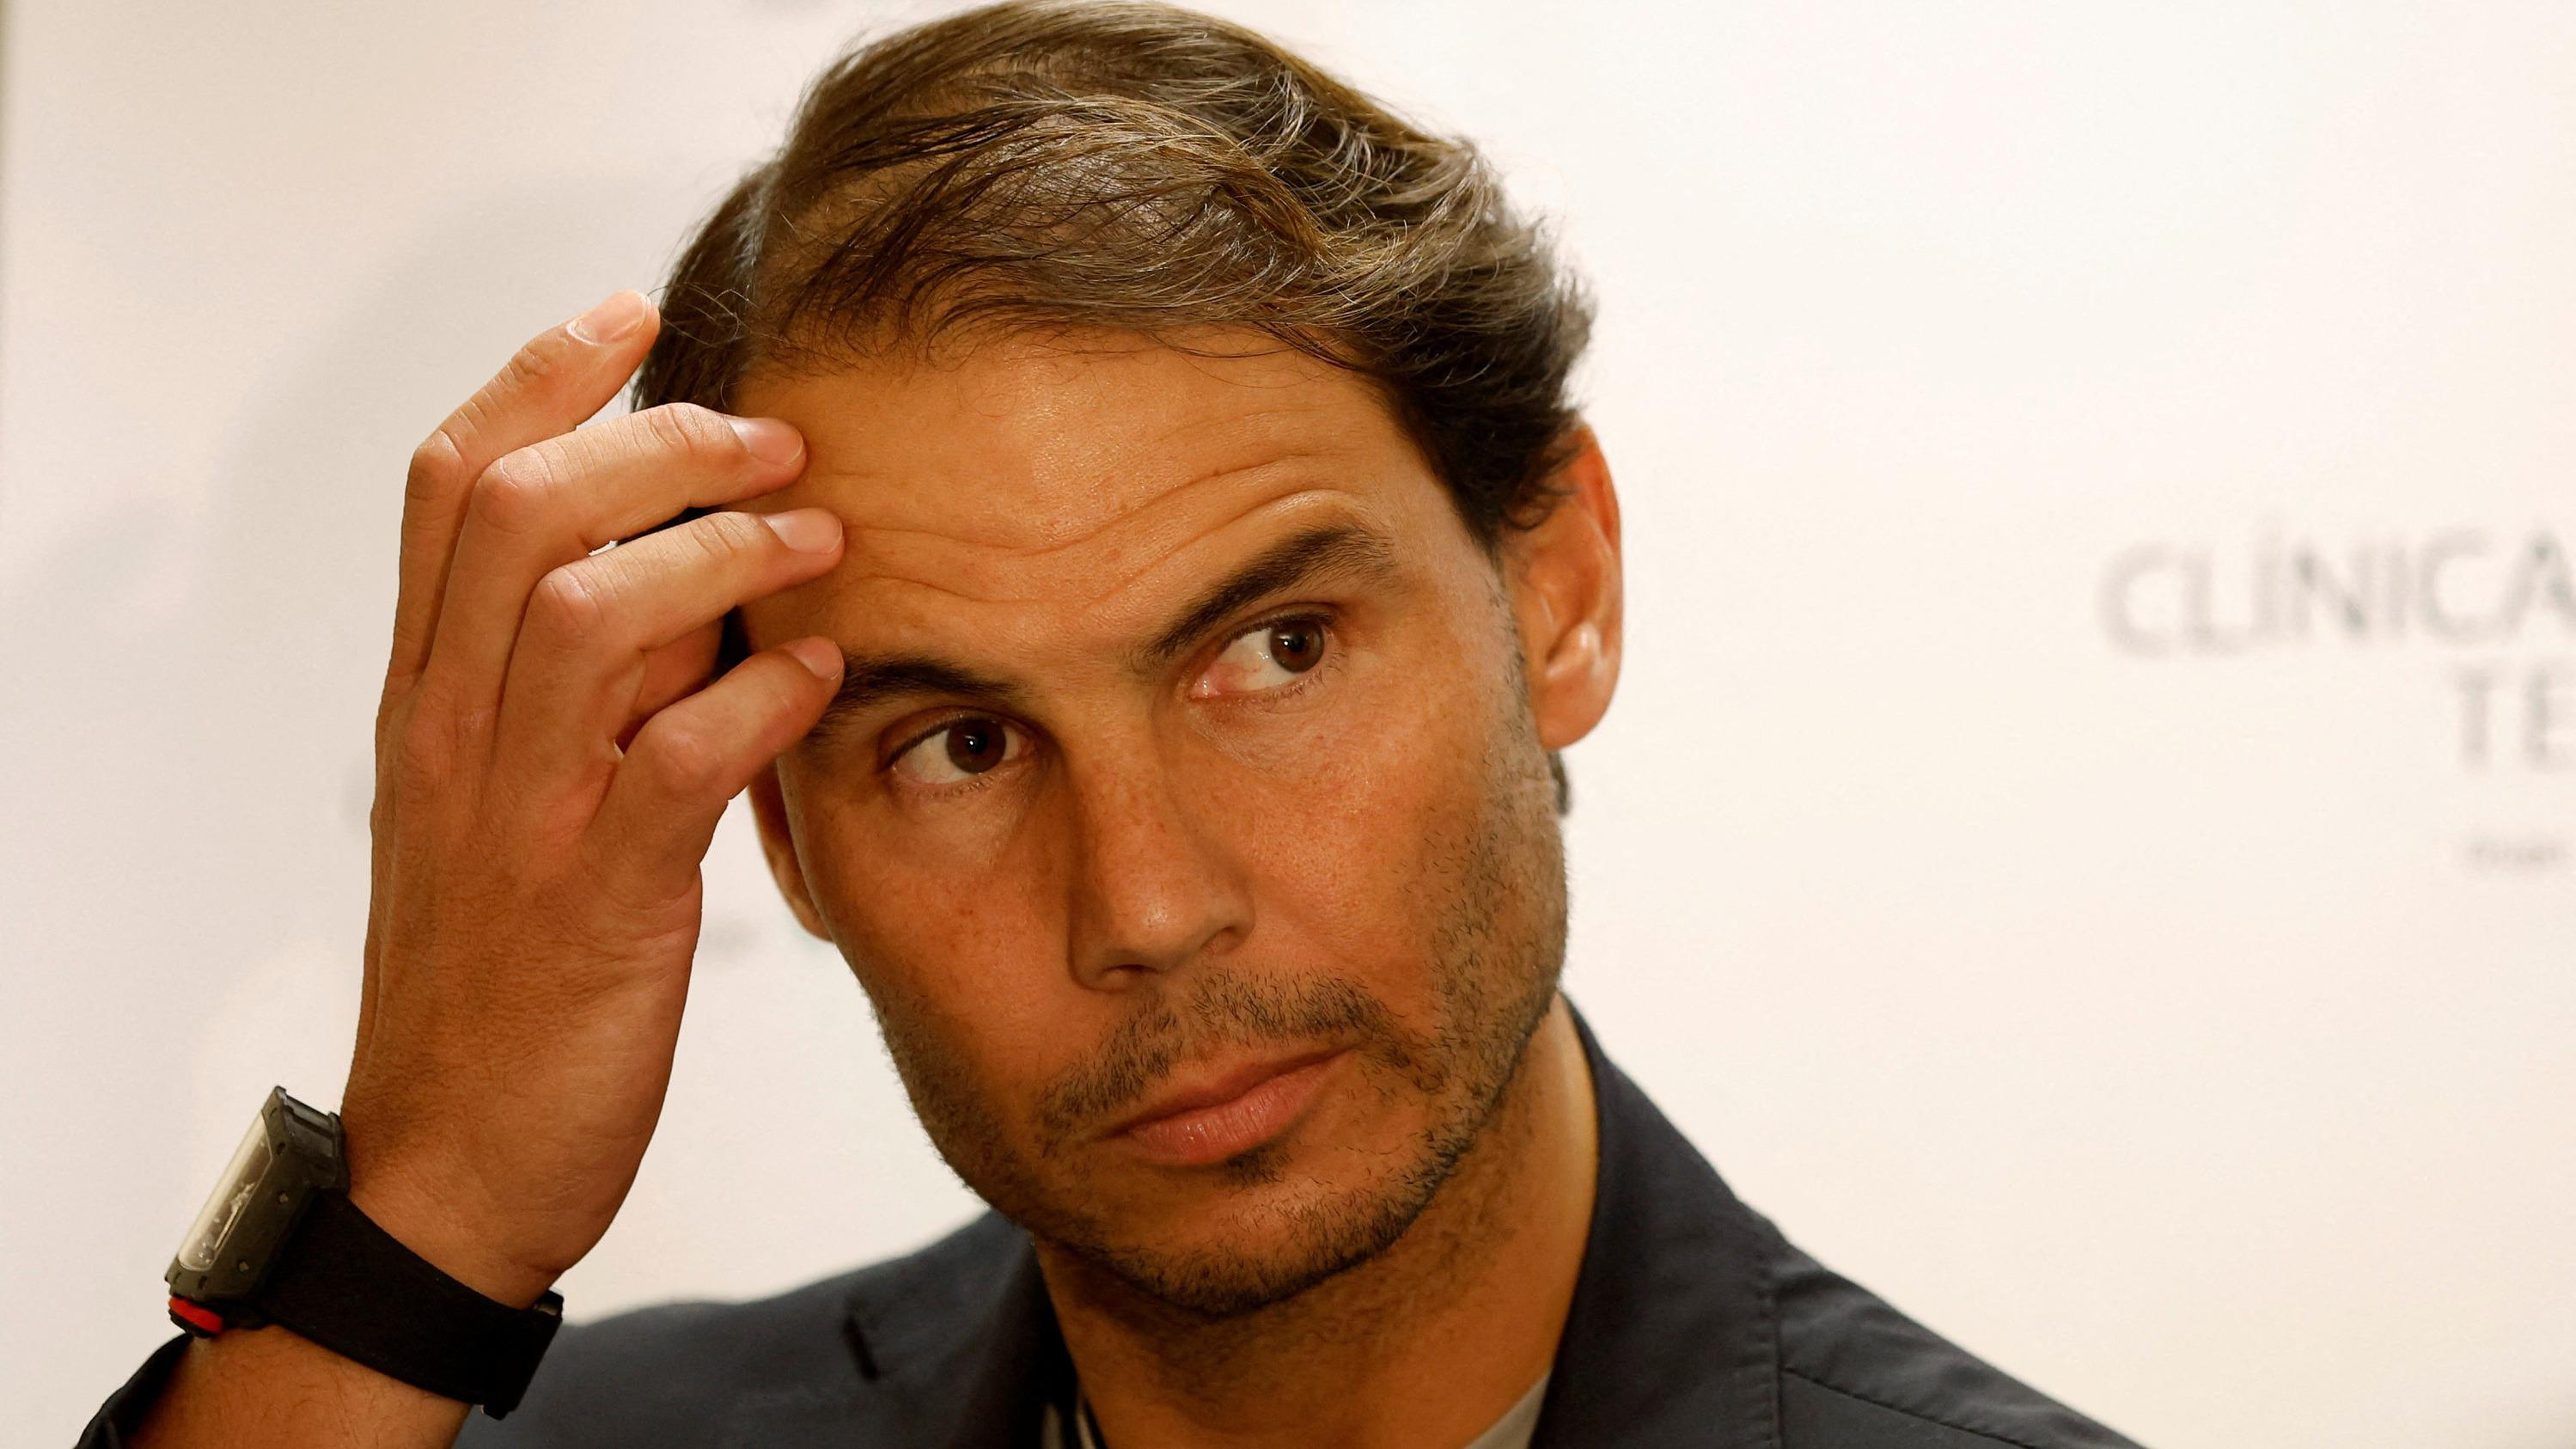 Tennis: “I expect myself not to expect anything in particular”, Rafael Nadal wants to be moderate on his return